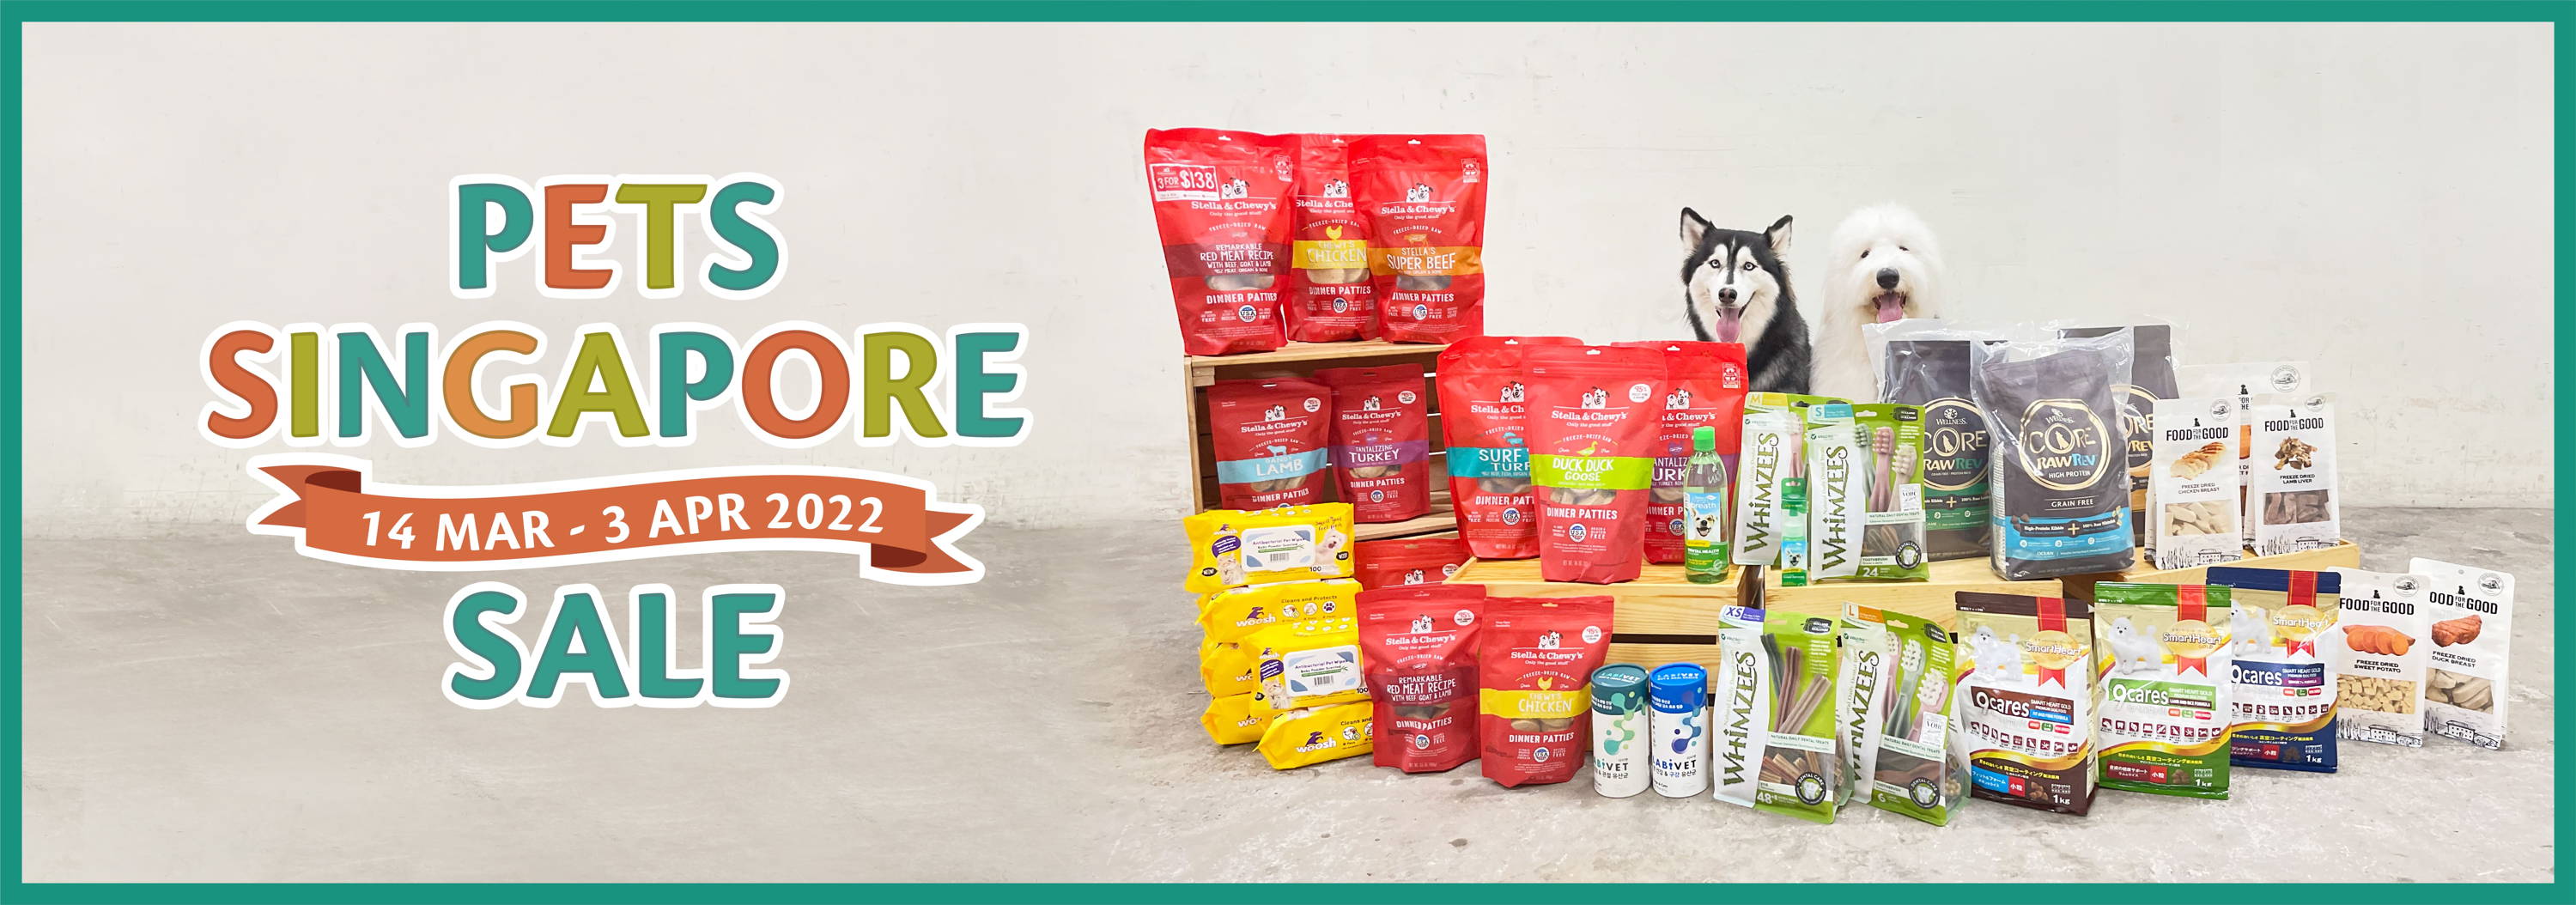 Pet Singapore Sale from 14 Mar to 3 Apr 2022.